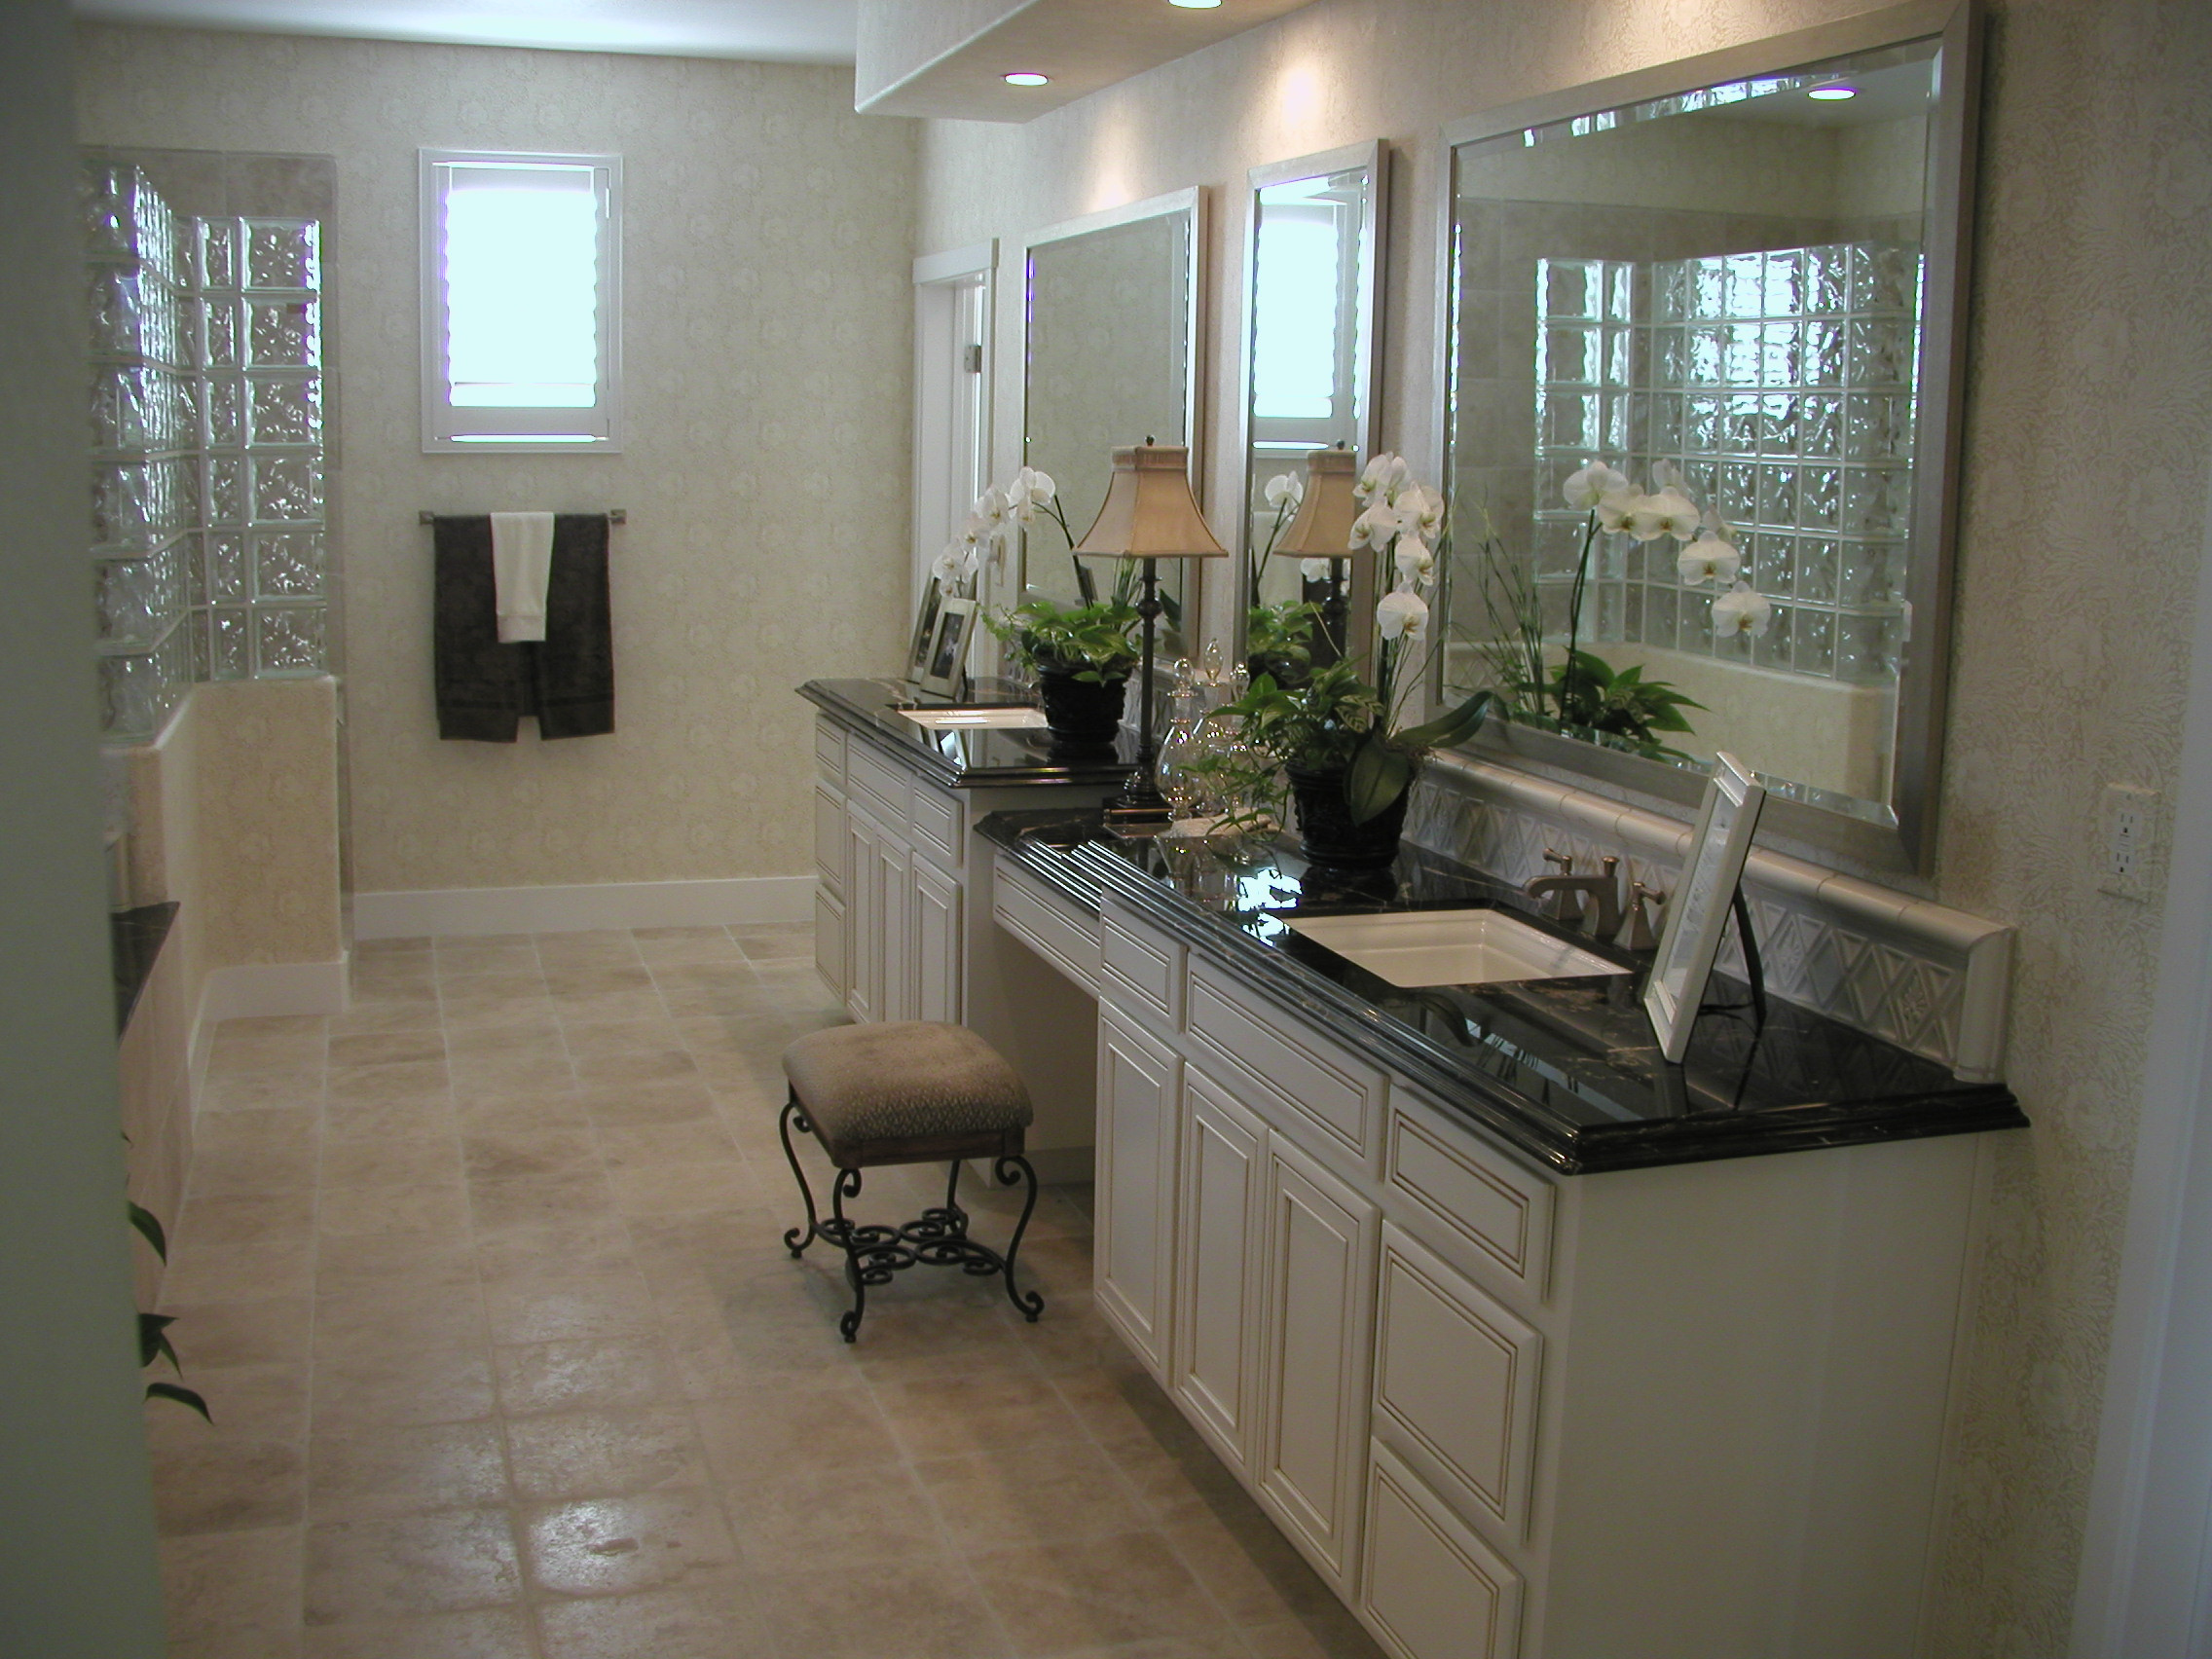 Jack And Jill Bathroom Designs
 What elements to Include In a His ‘n Hers Bathroom Design